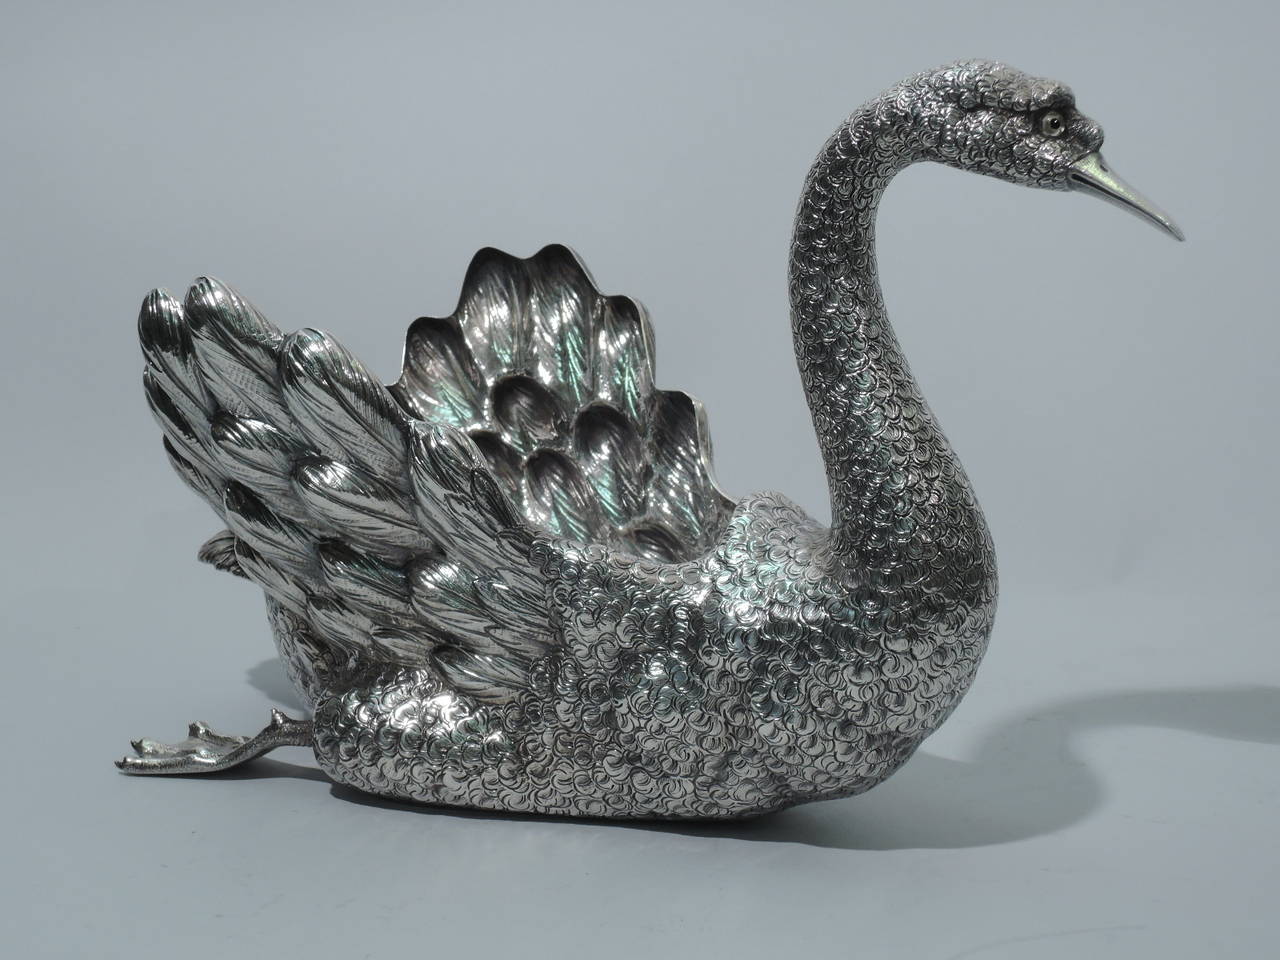 Sterling silver centerpiece bowl in form of swan. Made by Buccellai in Milan. Bird has scrolled neck and head, closed bill, and severe glass eyes, and is in glide mode with flipped back web feet. Feathers beautifully delineated, including the plumy